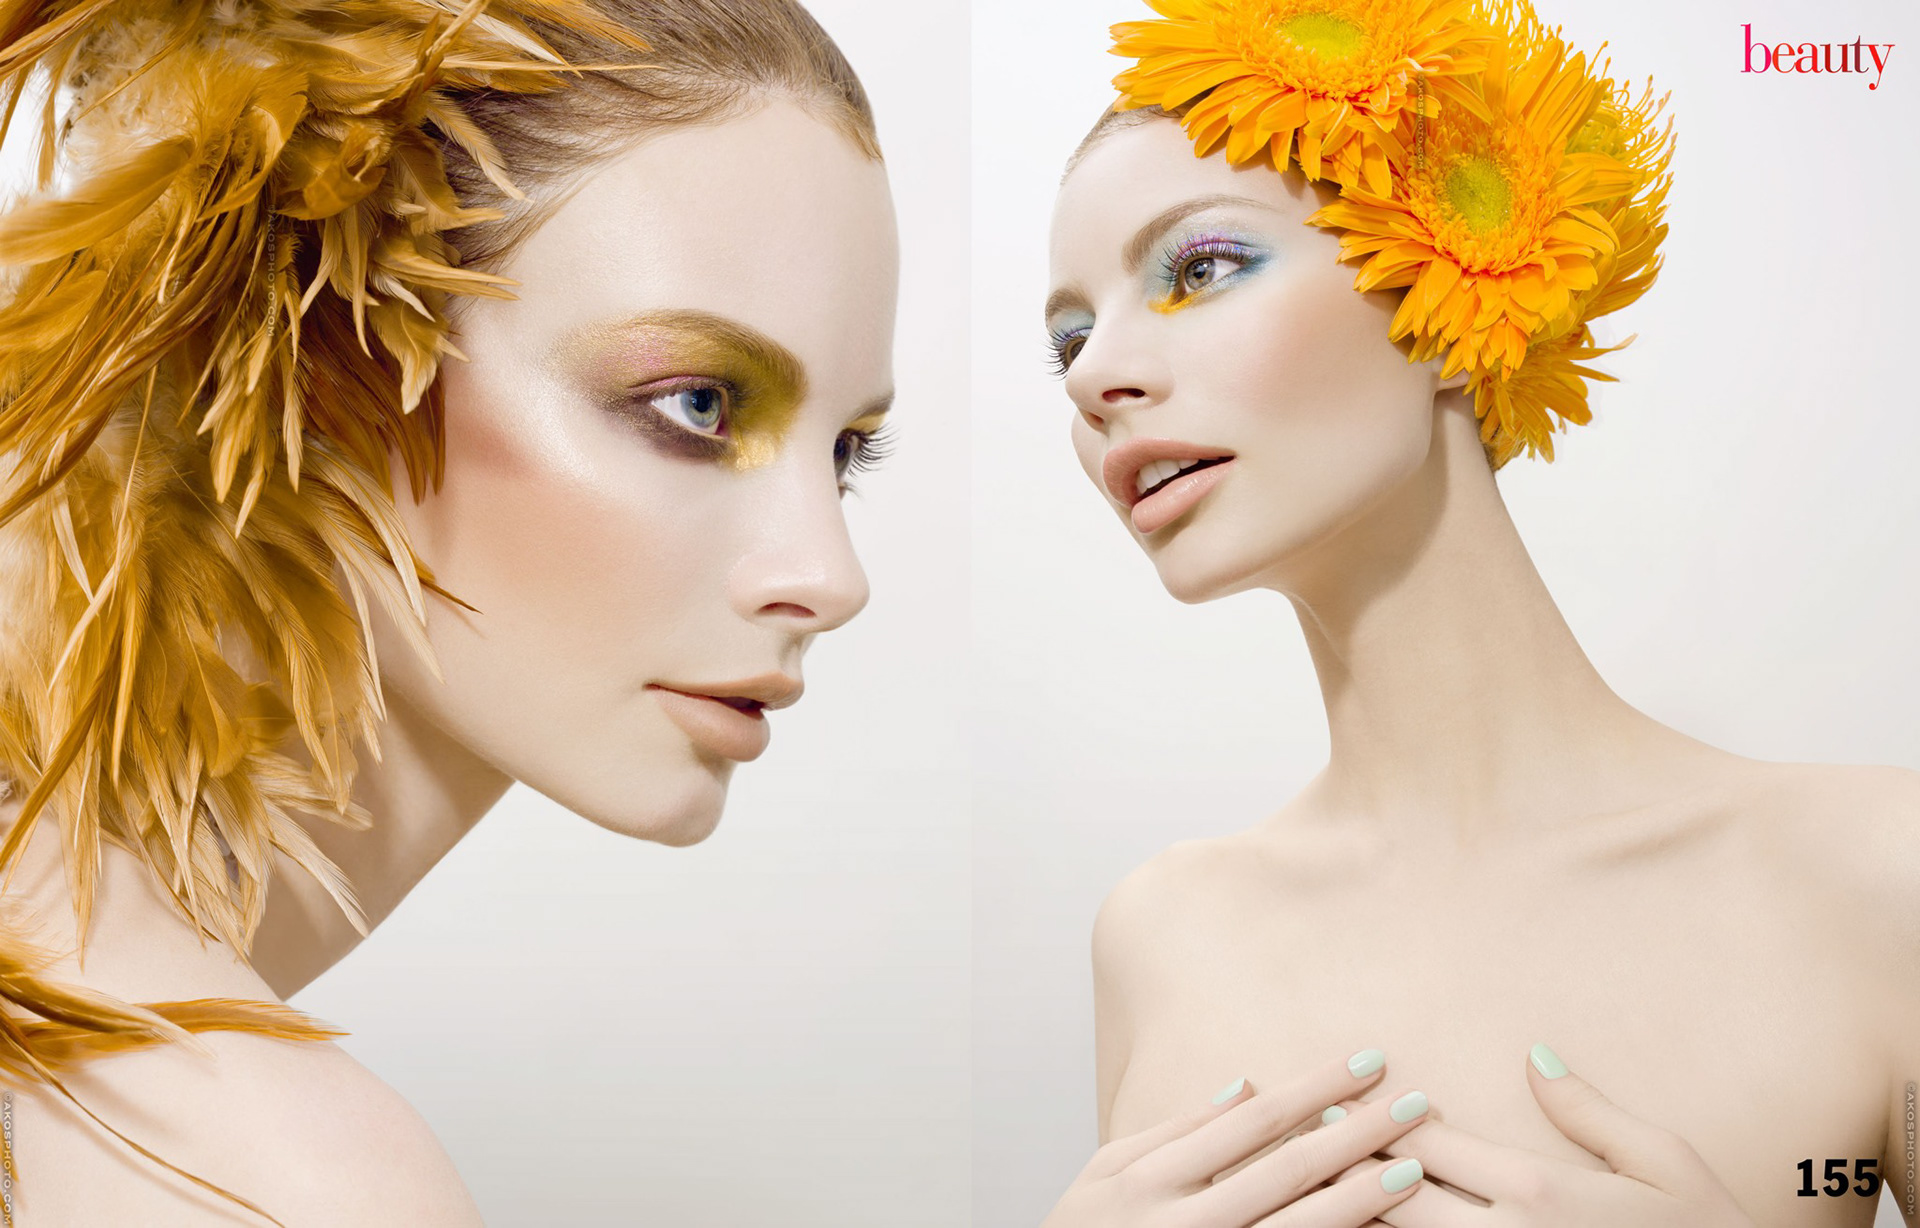 Akos is a Top Beauty and Fashion Photographer who is specialized in ...